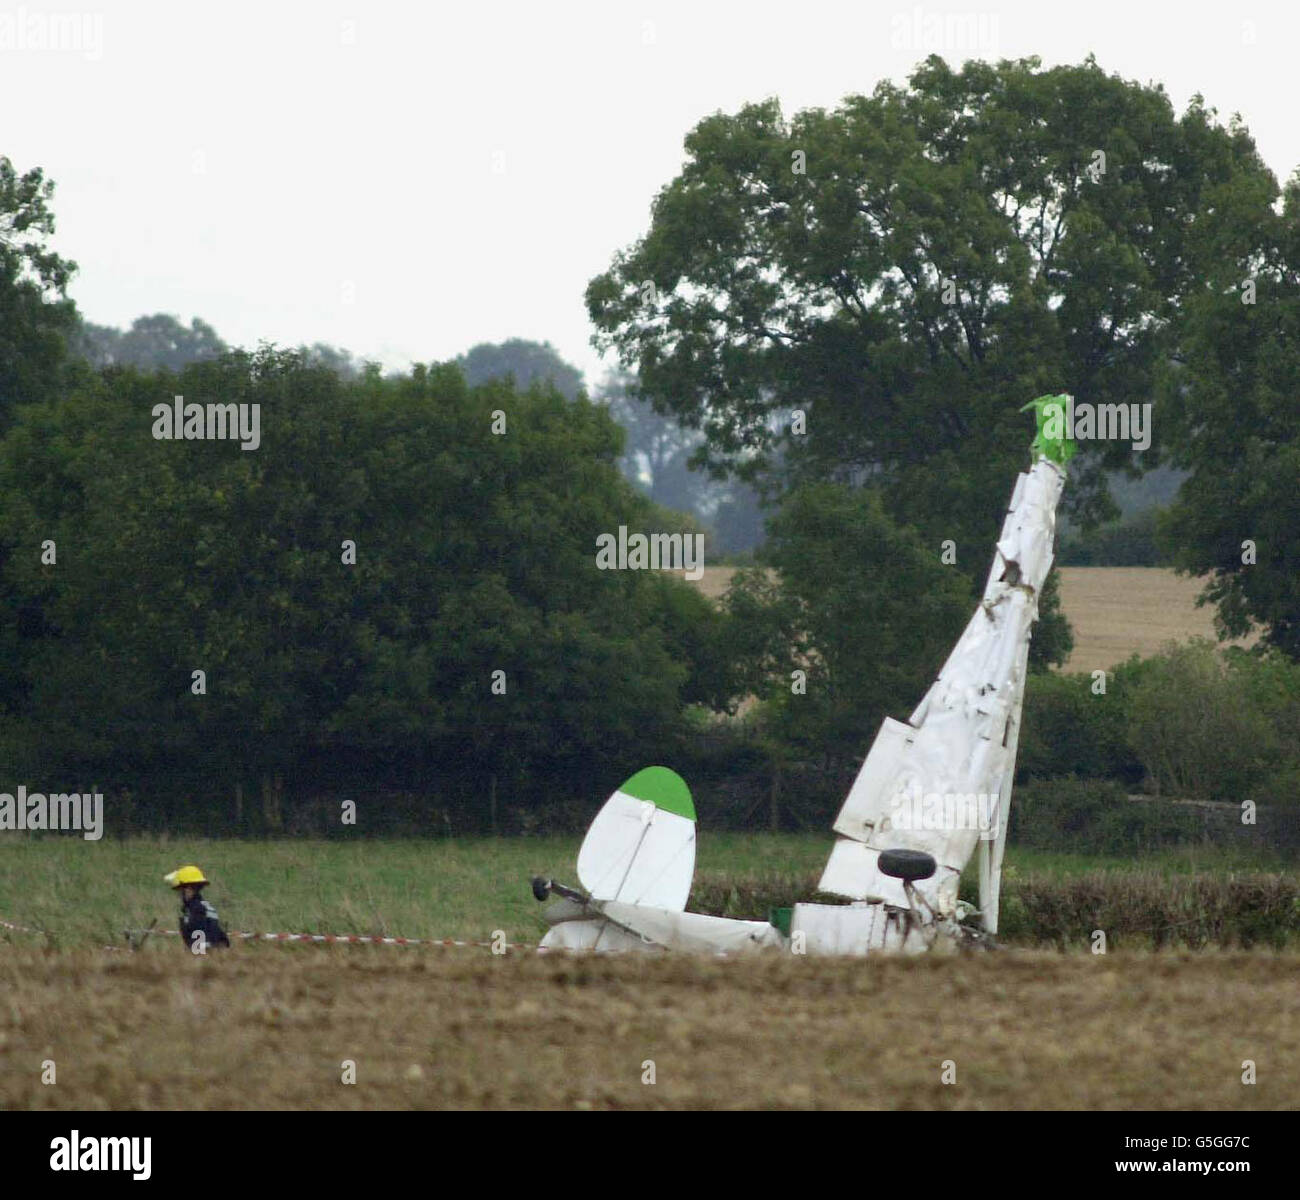 Police search the wreckage of a light aircraft in a field close to Aston Down Airfield near Stroud, Gloucestershire, which is thought to have collided with a glider. Two people were killed in the accident. * 15/9/01: Air accident investigators were examining wreckage after two people were killed in a mid-air collision between a glider and a light aircraft, Emergency services were called to Aston Down airfield, Aston Down, near Minchinhampton, Gloucestershire, yesterday after reports of the collision. A doctor pronounced two people dead, one from each aircraft, found in the wreckage of the Stock Photo